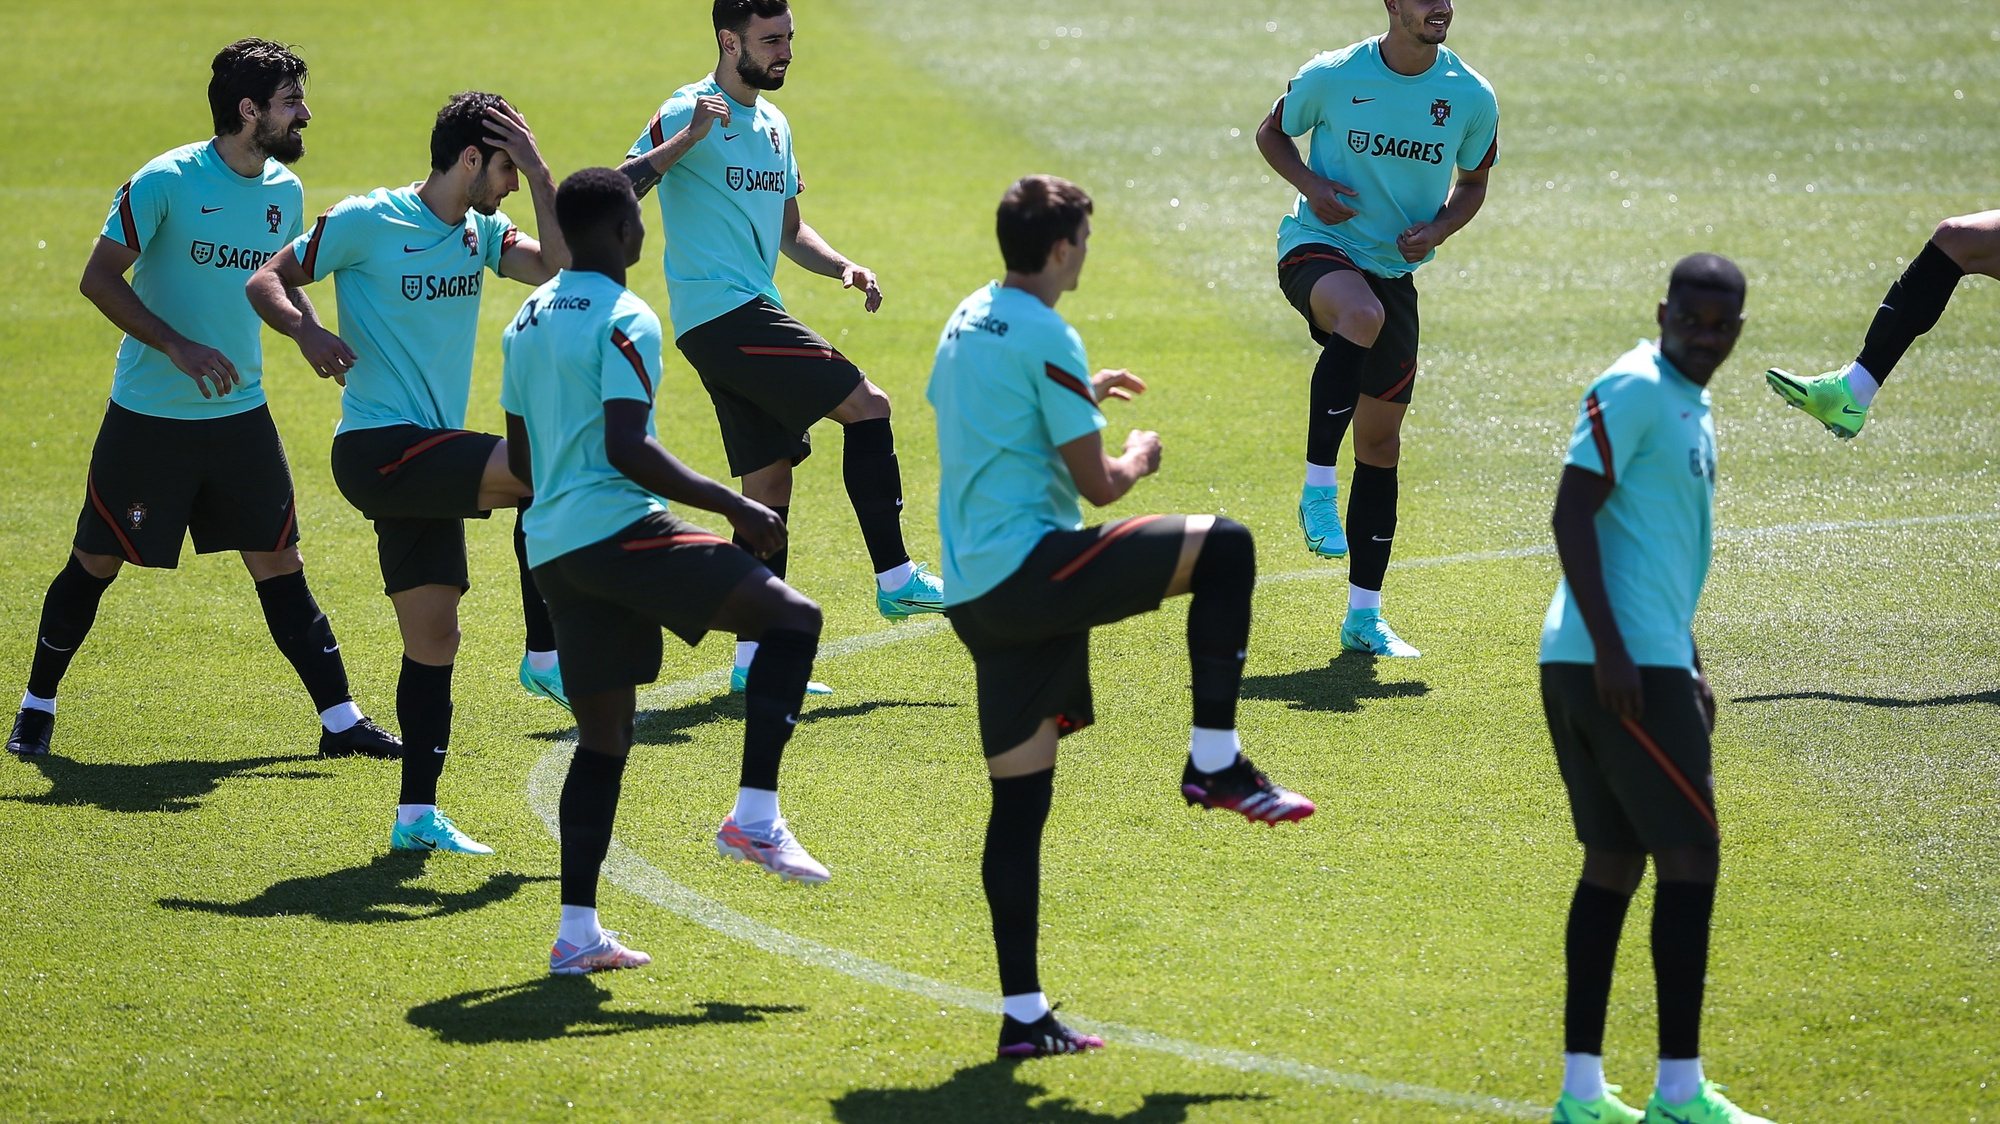 Portugal players (L-R) Ruben Neves, Gonçalo Guedes, Bruno Fernandes and André Silva, warming up during the stage of the Portuguese National Team preparation for the Euro 2020, in Oeiras, outskirts of Lisbon, Portugal, 05 June 2021.  RODRIGO ANTUNES/LUSA